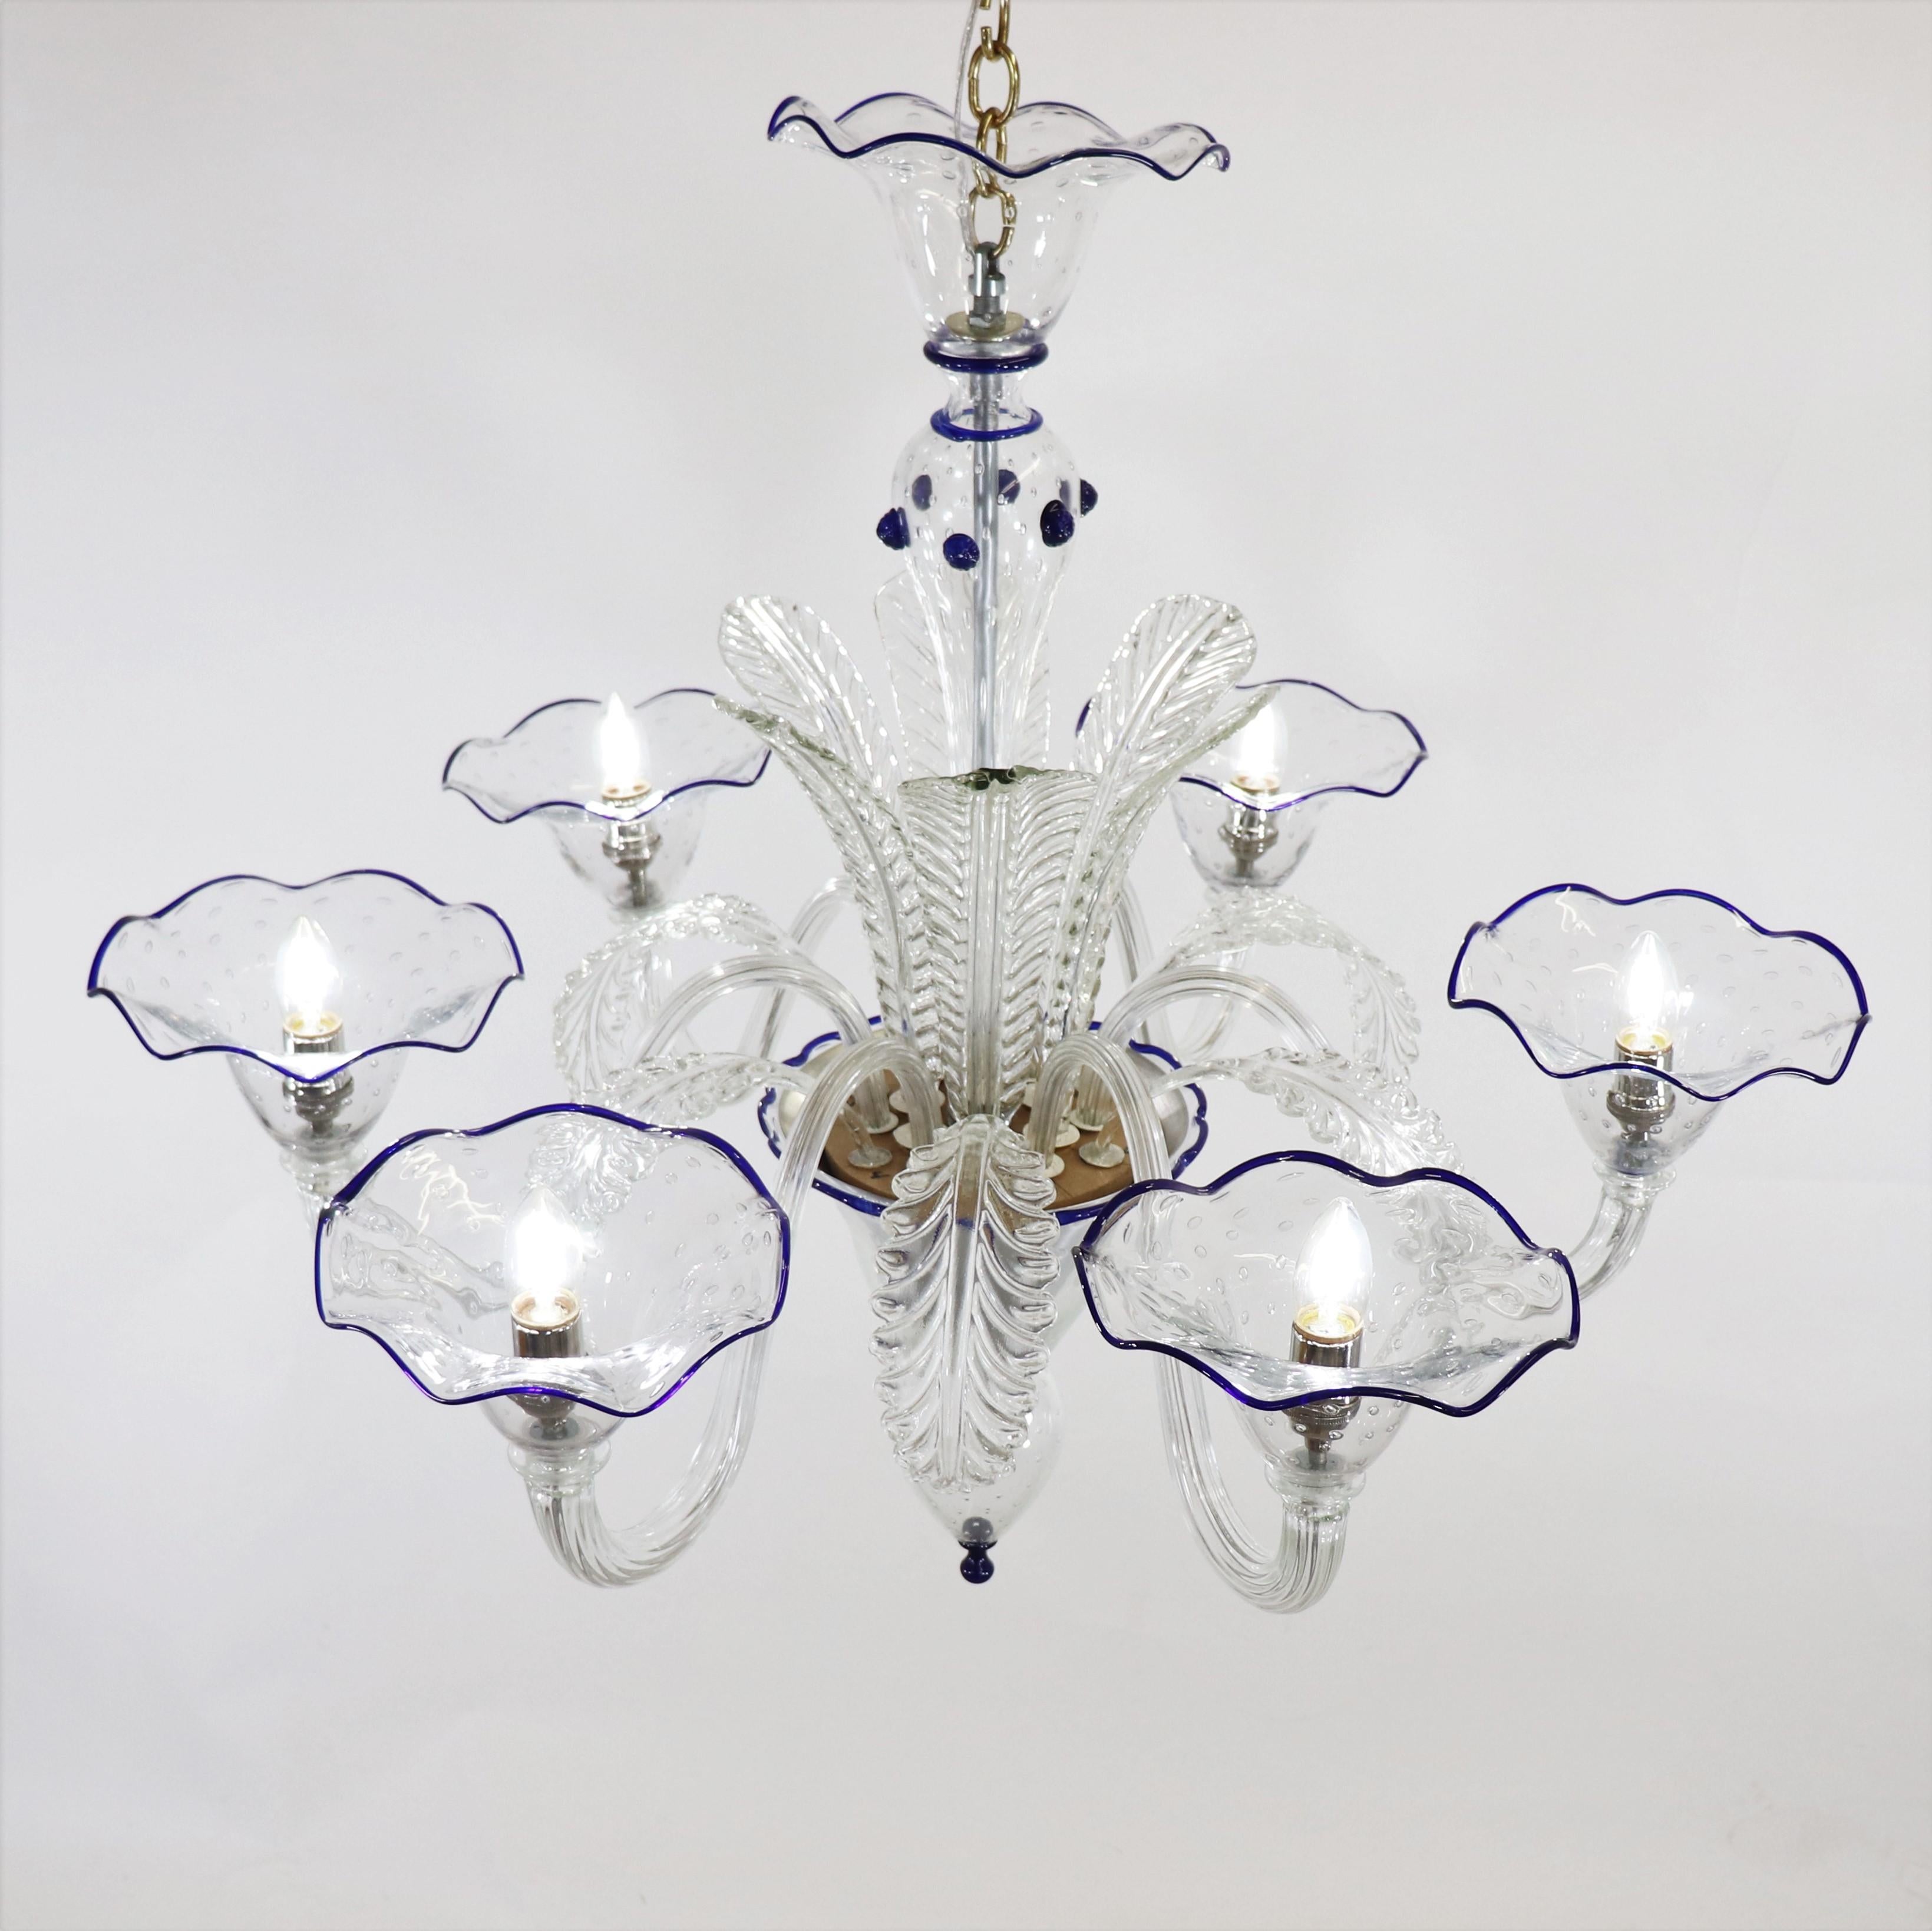 Hand-Crafted Large Modern Baroque Style Cristallino Bullicante and Blue Trim Murano For Sale